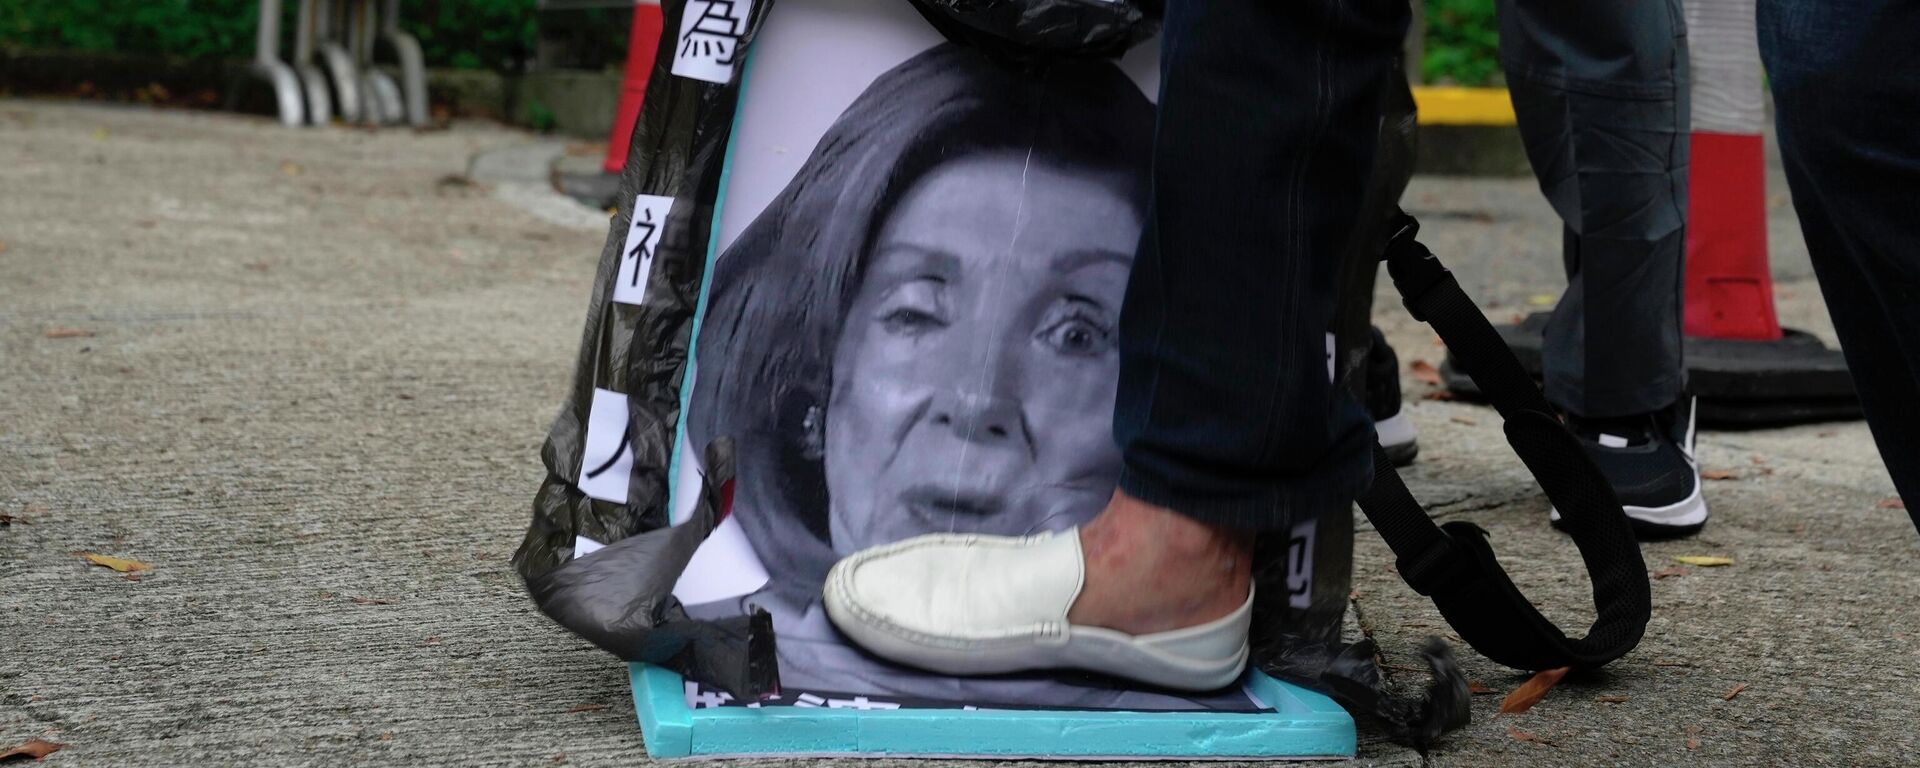 Pro-China supporters step on a picture of U.S. House Speaker Nancy Pelosi during a protest outside the Consulate General of the United States in Hong Kong, Wednesday, Aug. 3, 2022. U.S. House Speaker Nancy Pelosi arrived in Taiwan late Tuesday, becoming the highest-ranking American official in 25 years to visit the self-ruled island claimed by China, which quickly announced that it would conduct military maneuvers in retaliation for her presence. (AP Photo/Kin Cheung) - Sputnik International, 1920, 23.01.2023